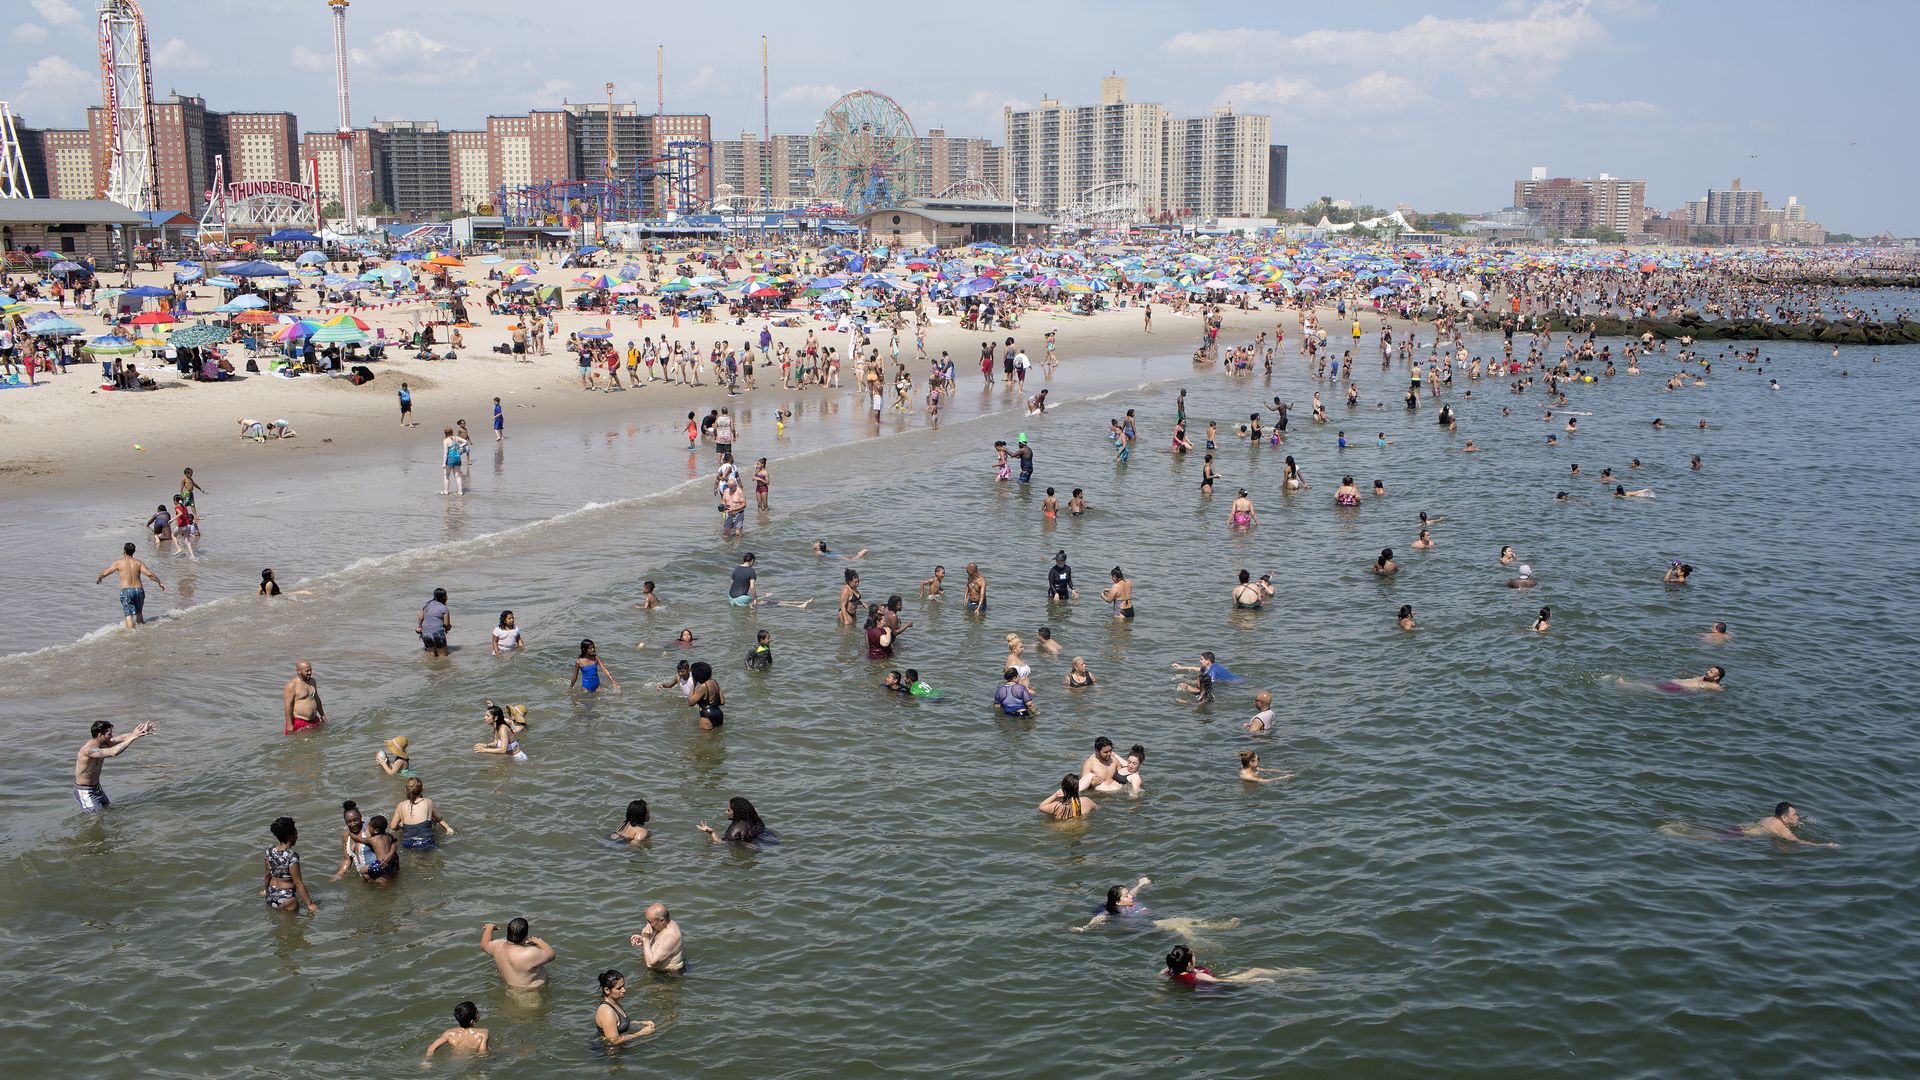  As a heat wave descends upon New York, people seek refuge from the record high temperatures at the beach in Coney Island on July 20, 2019 in New York City. 